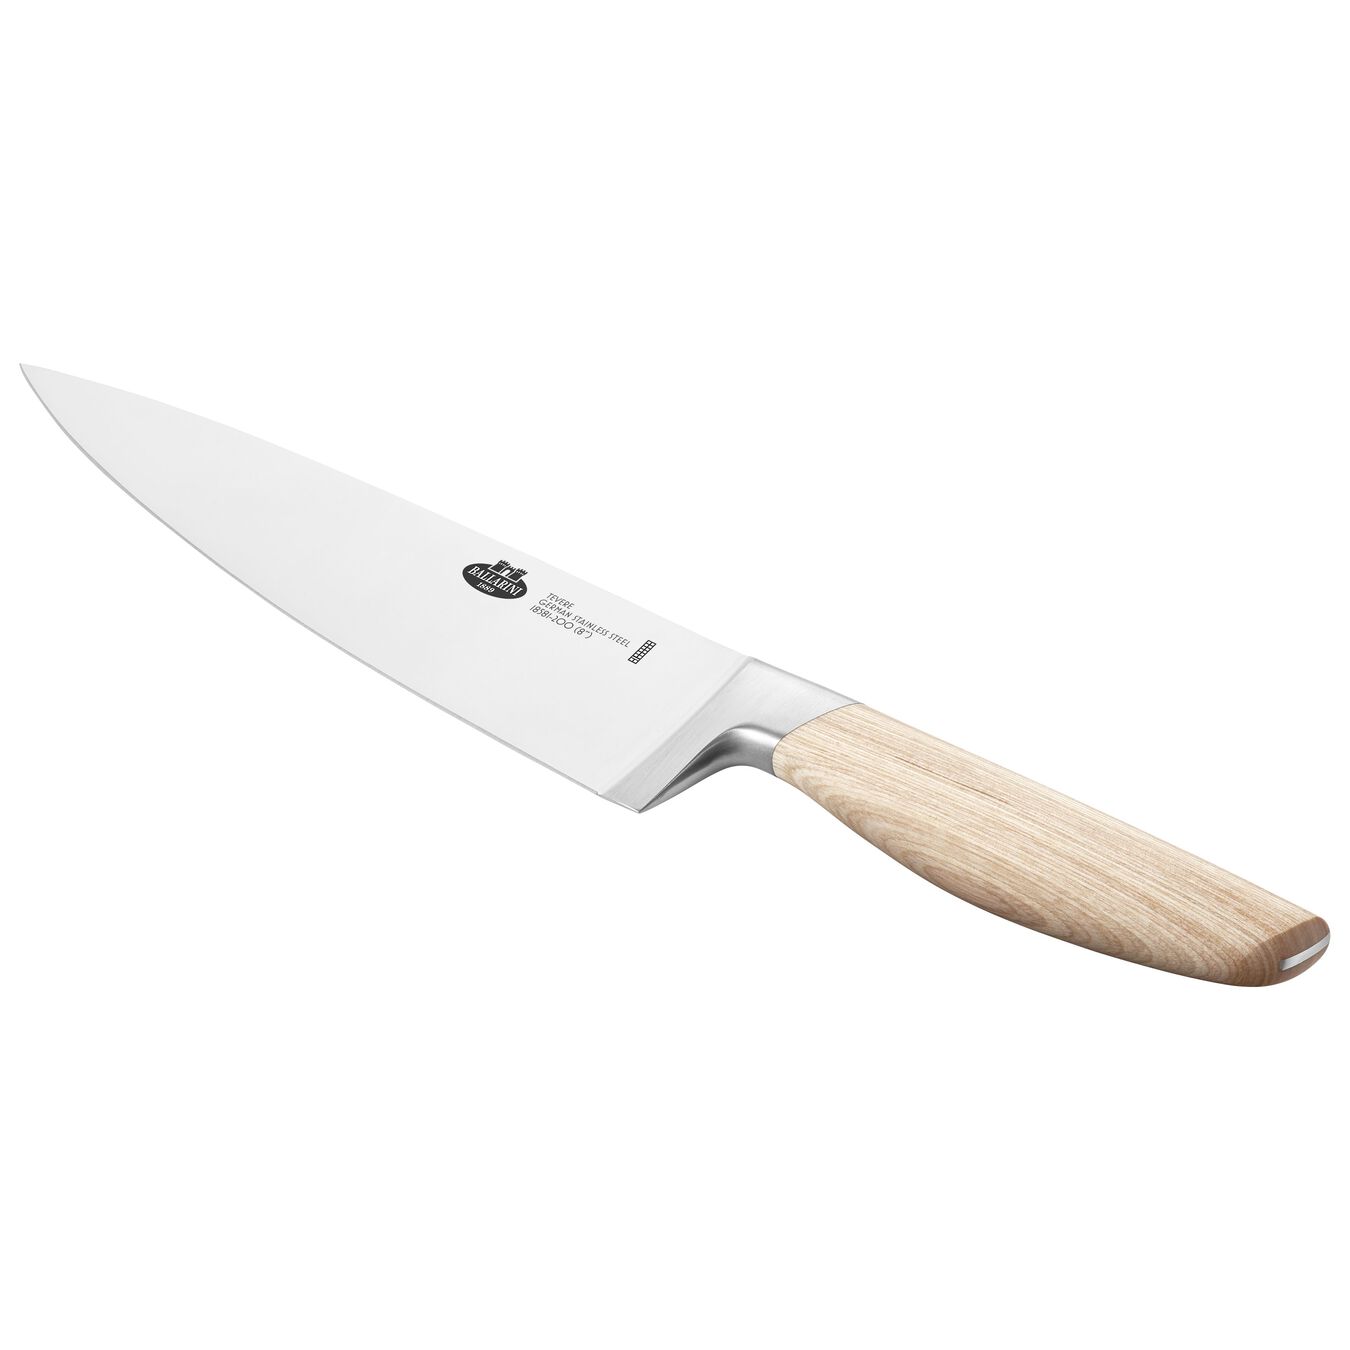 8 inch Chef's knife,,large 6